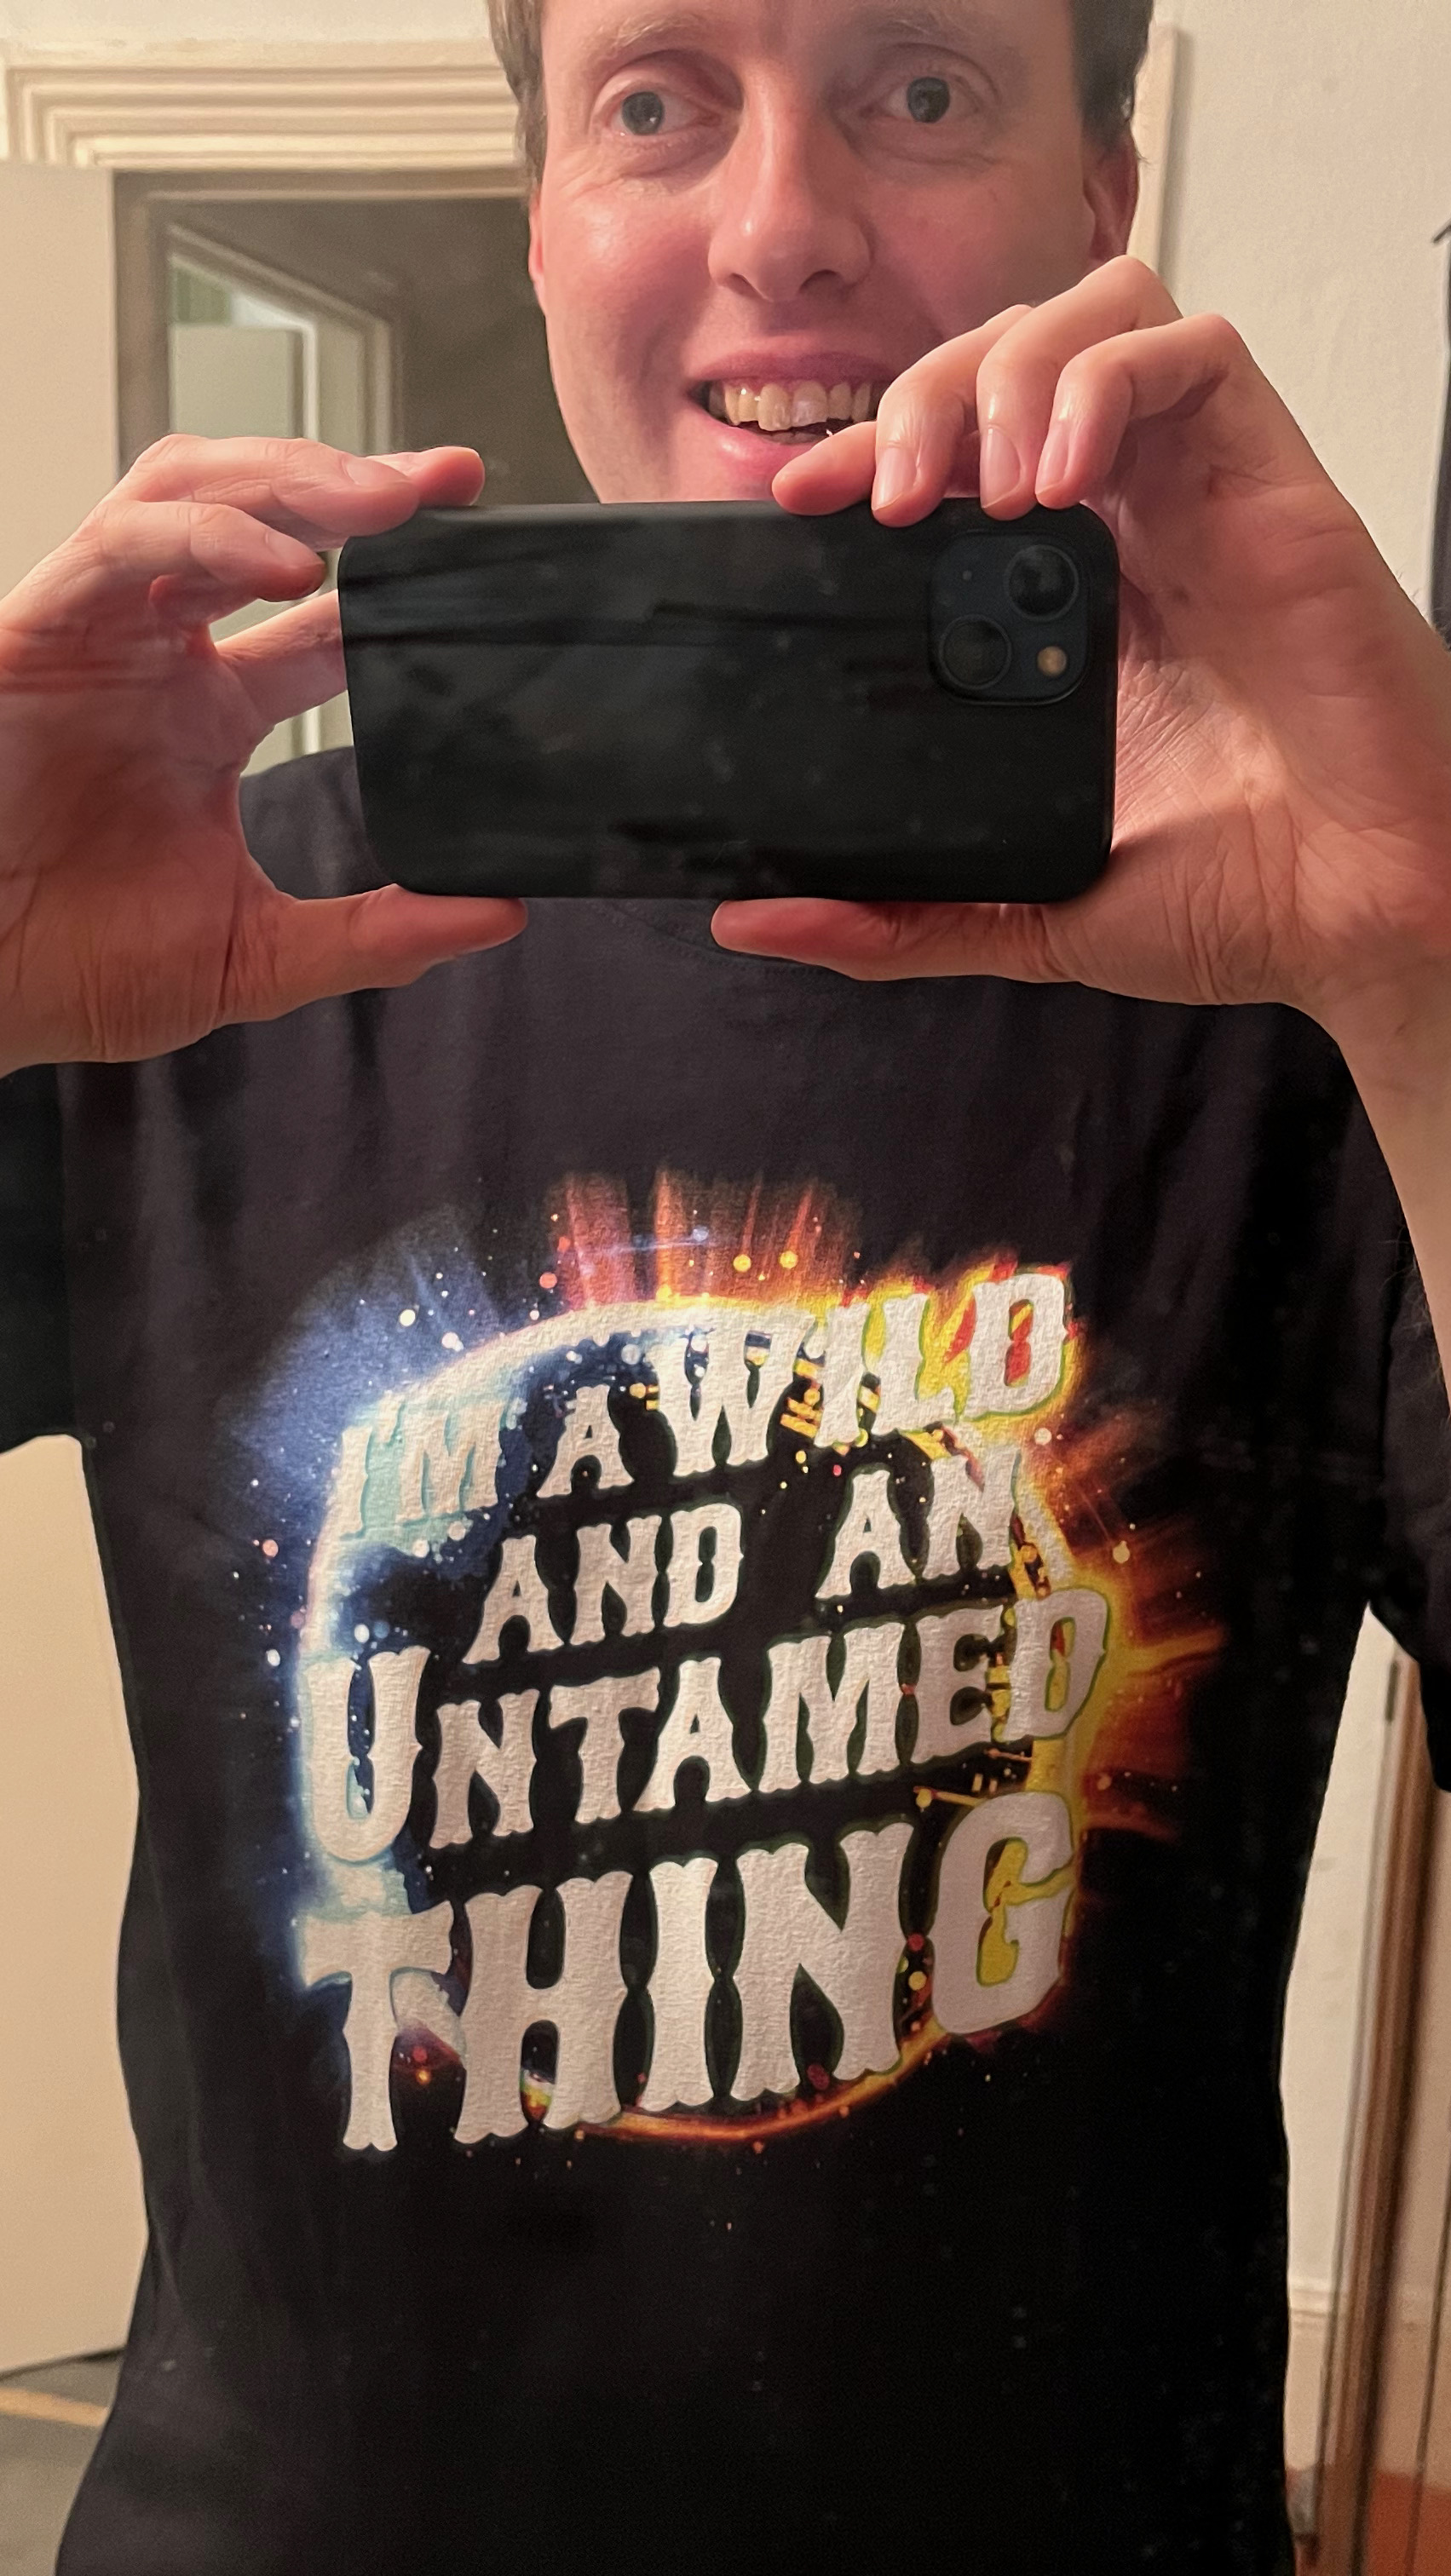 A mirror selfie of me wearing a black t-shirt that says I'm A Wild And Untamed Thing, in big white letters. Behind the text is a circle with a multi-coloured border that is radiating out lines and spots, as if giving off energy or exploding.